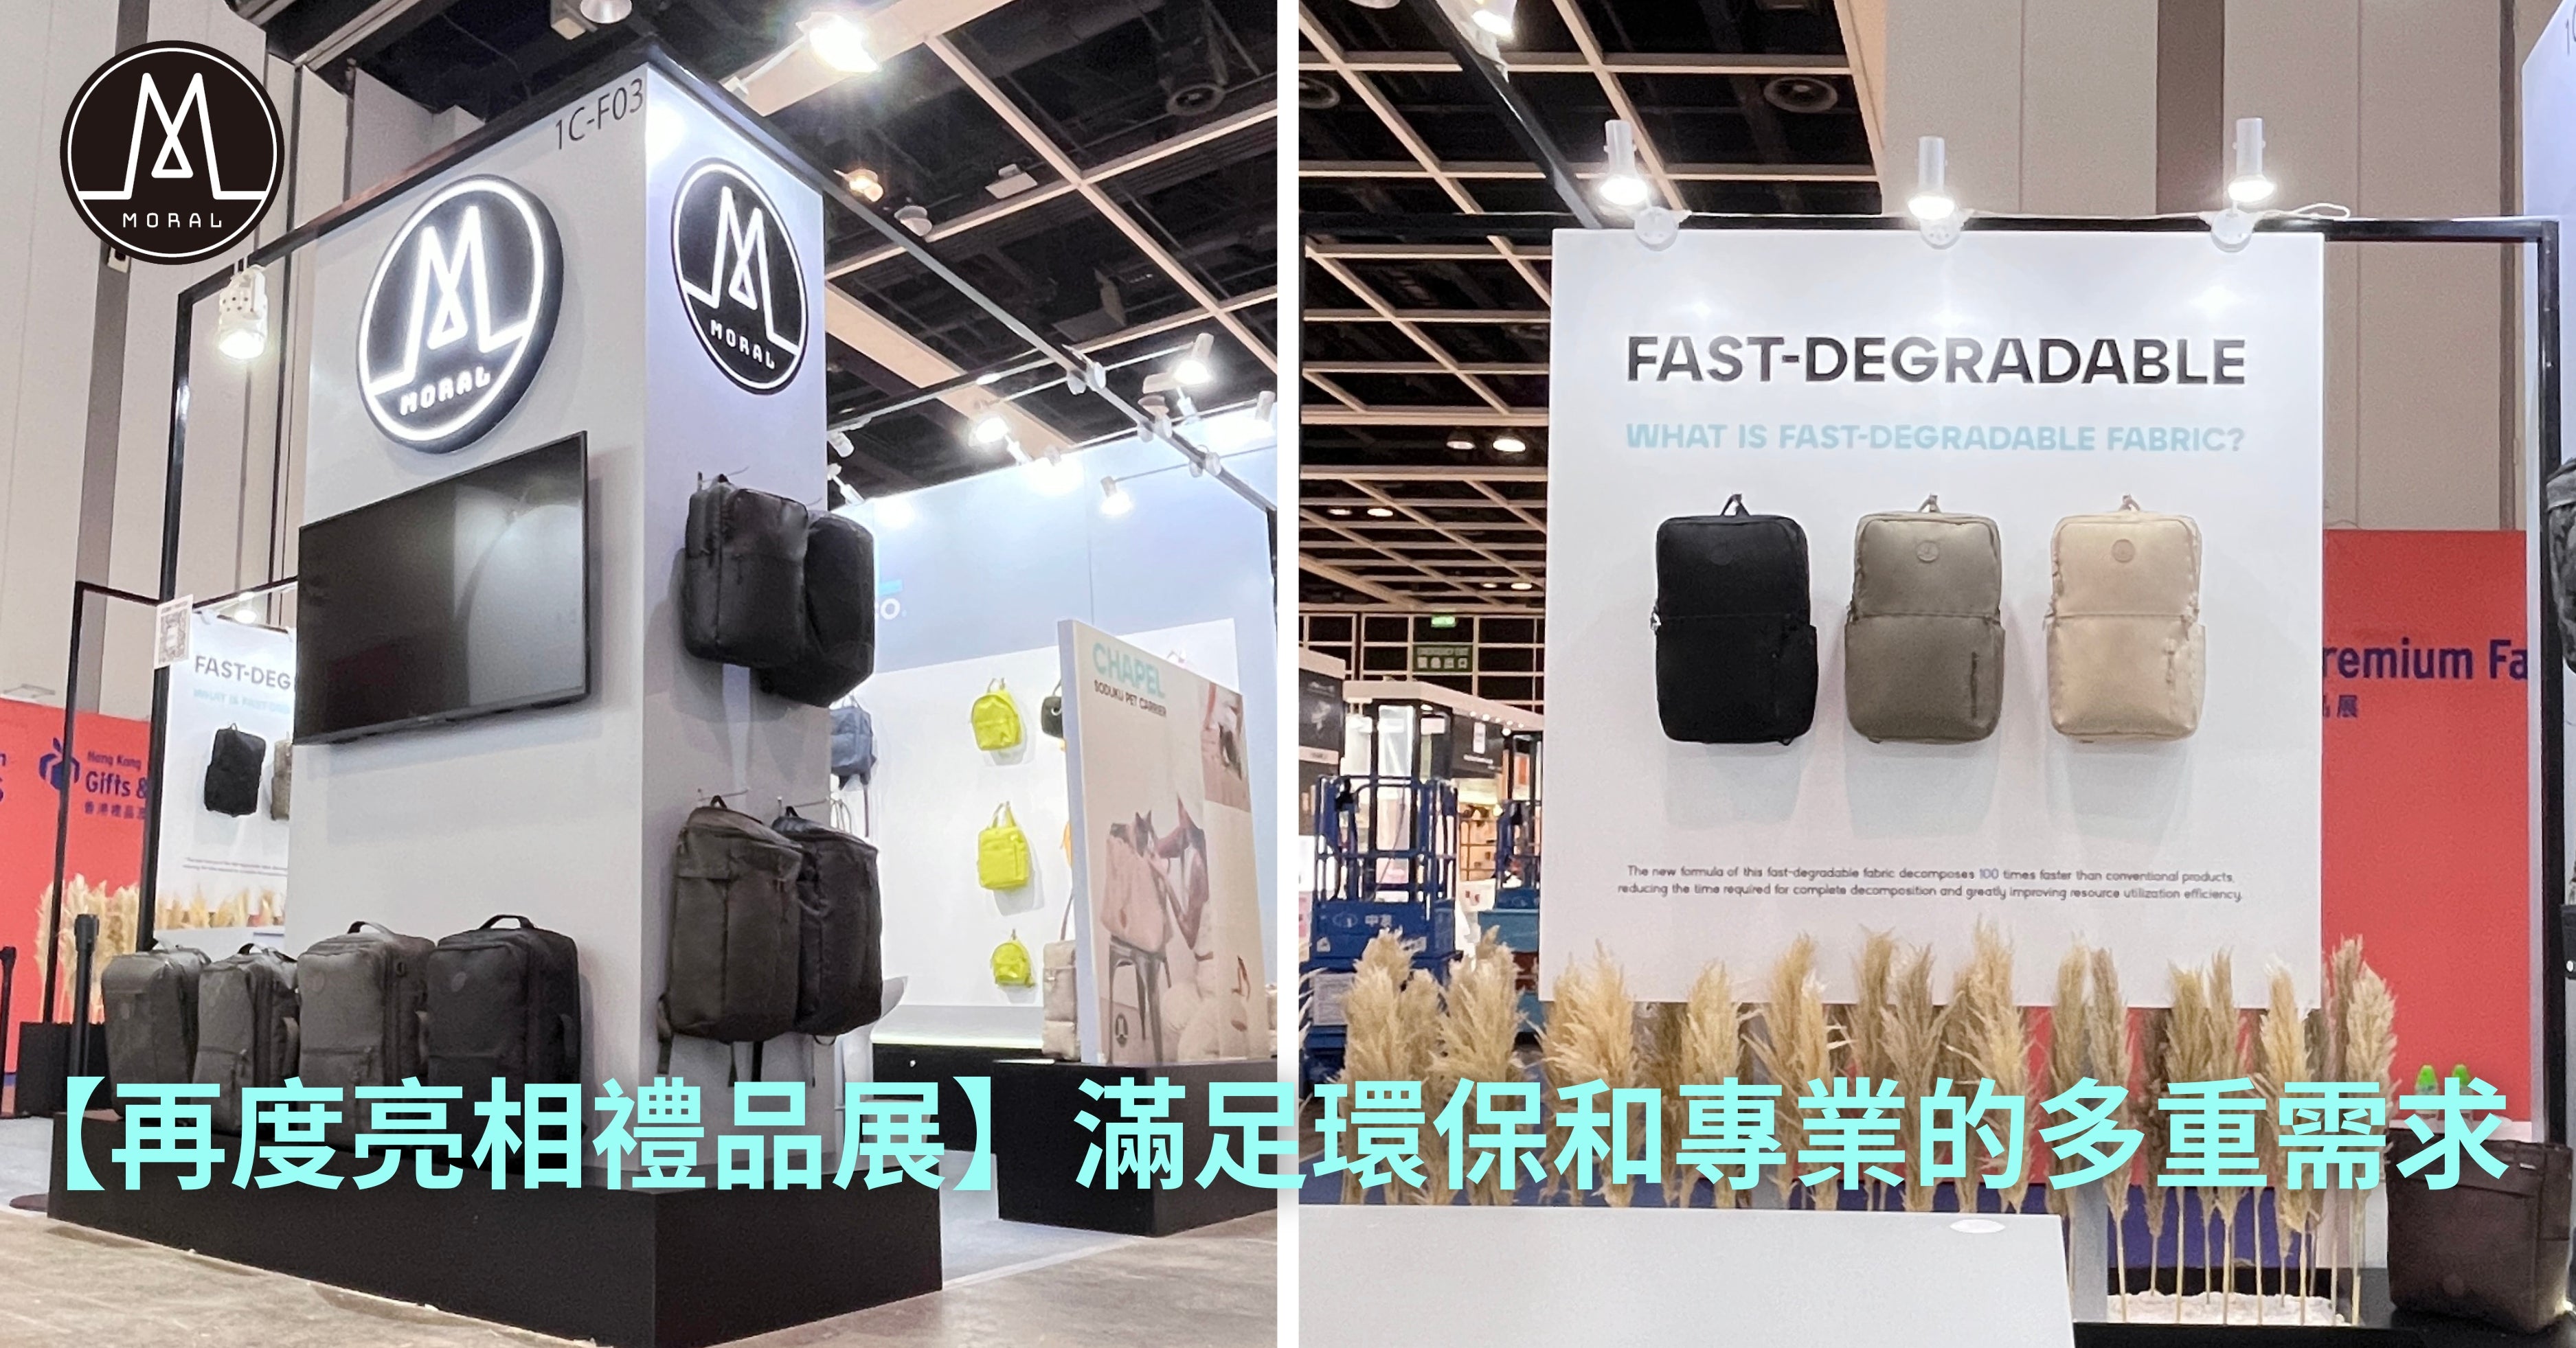 【Moral Bags Returns to Hong Kong Gift and Premium Fair】 Sustainable Fashion Brand Moral Bags Returns to Hong Kong Gift and Premium Fair